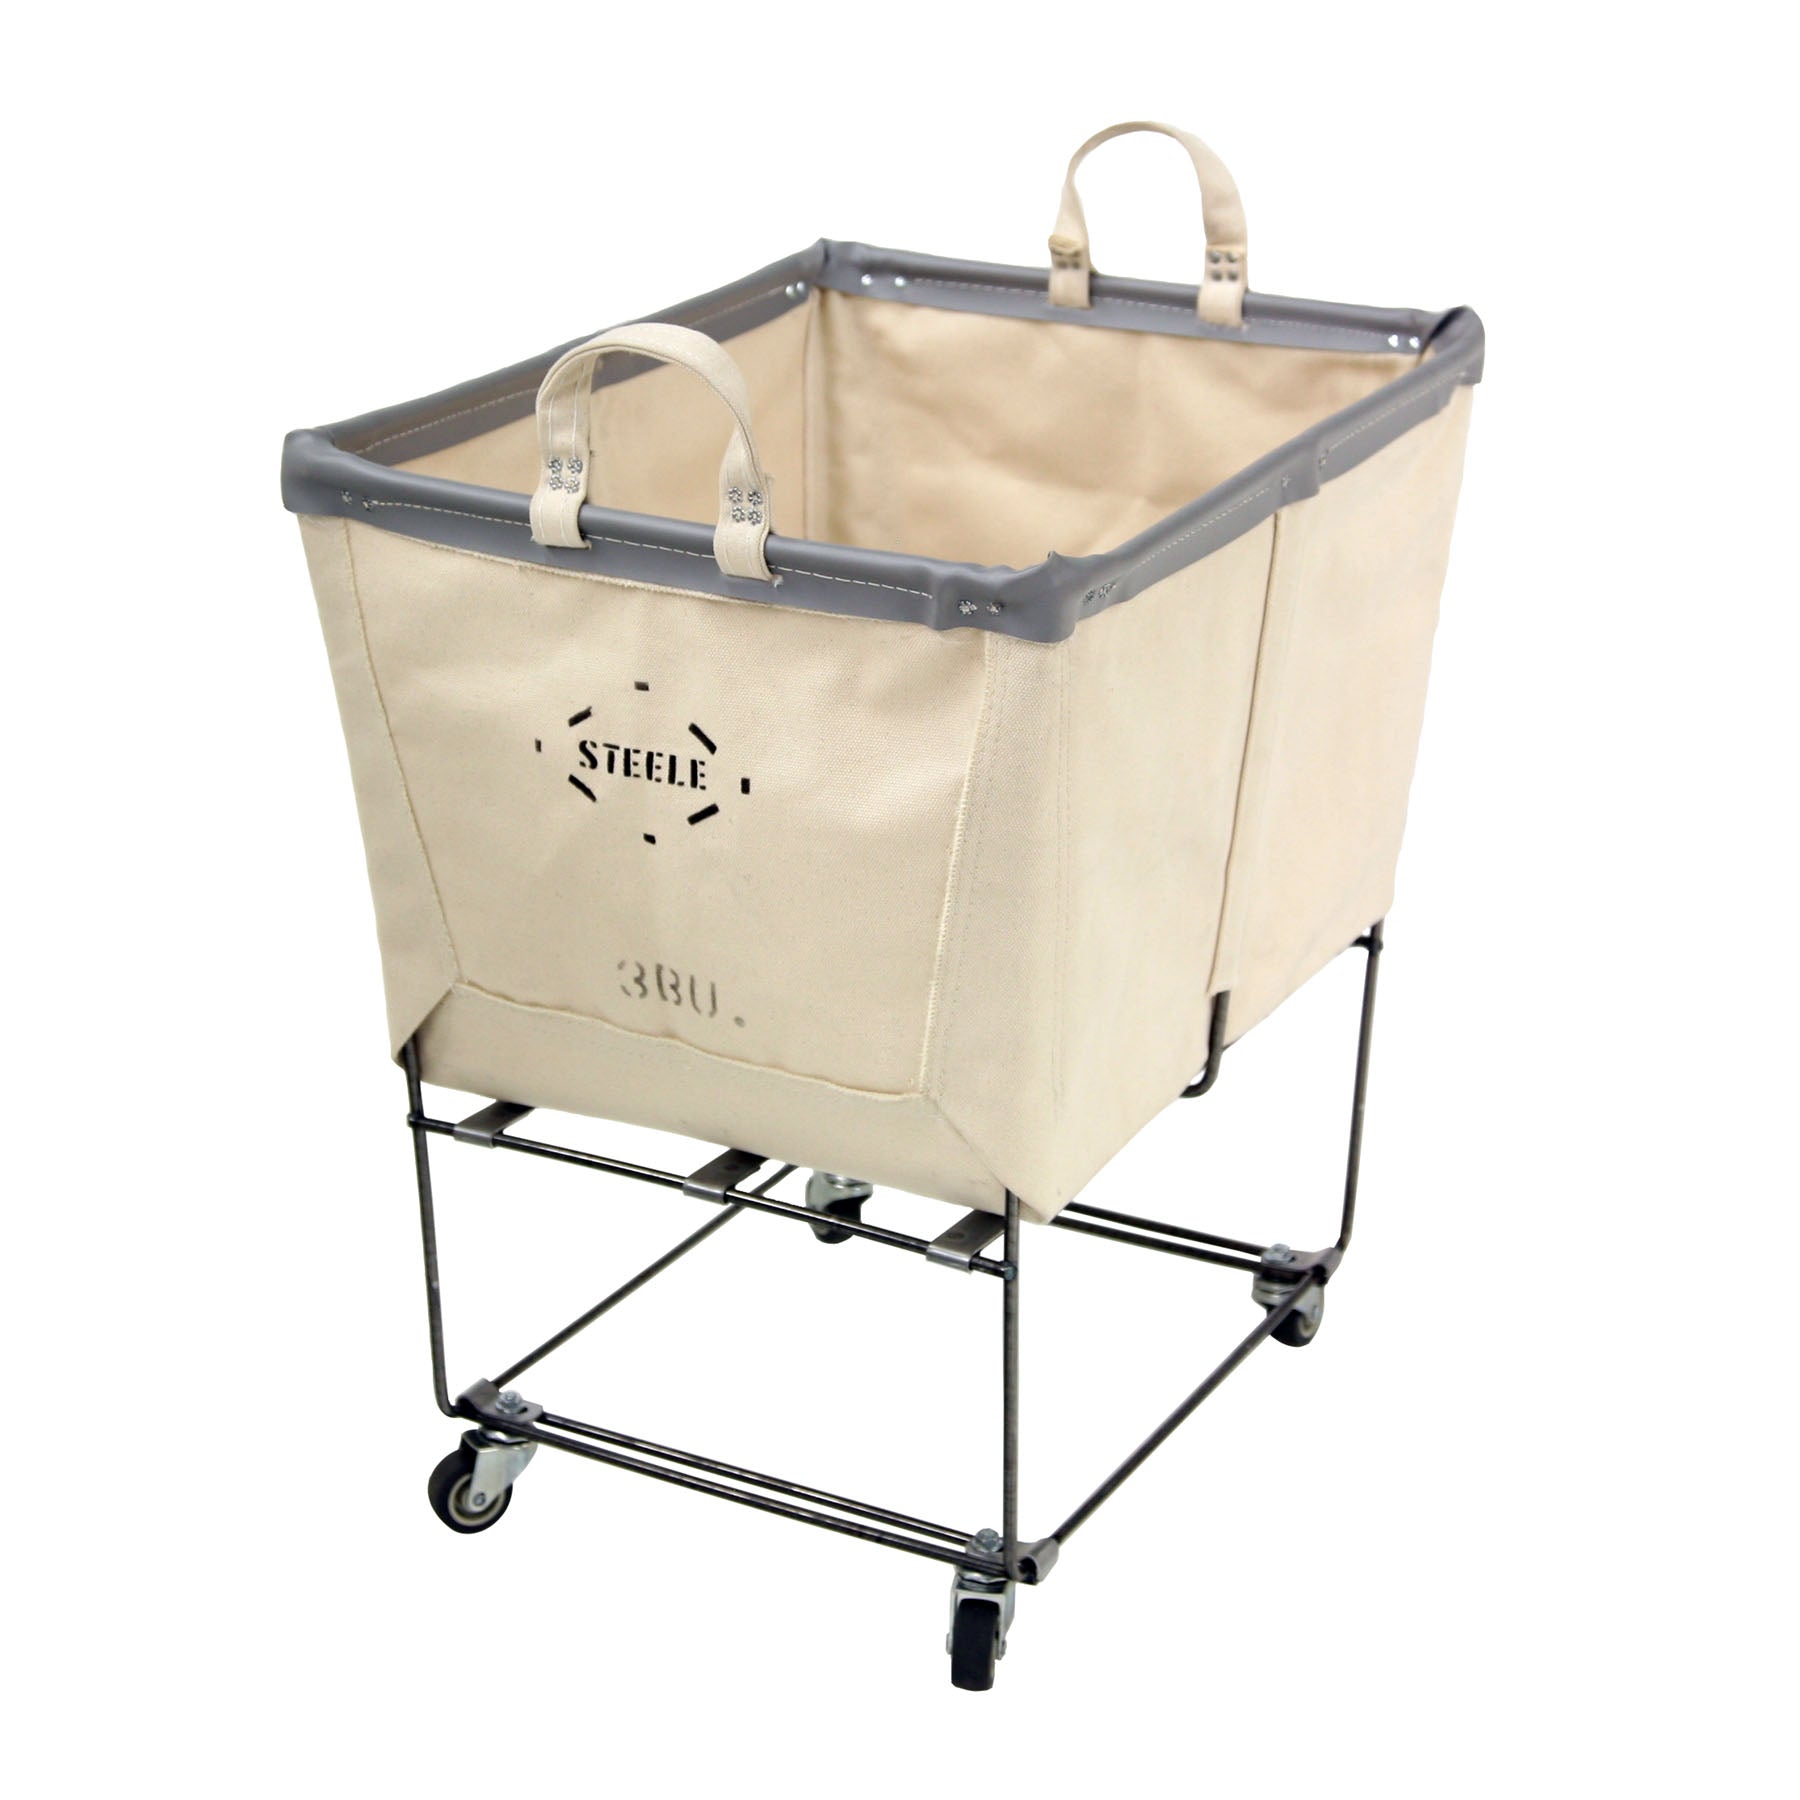 Commercial Large Rolling Canvas Bin Laundry Hamper on Wheels, White, Large  - Fred Meyer